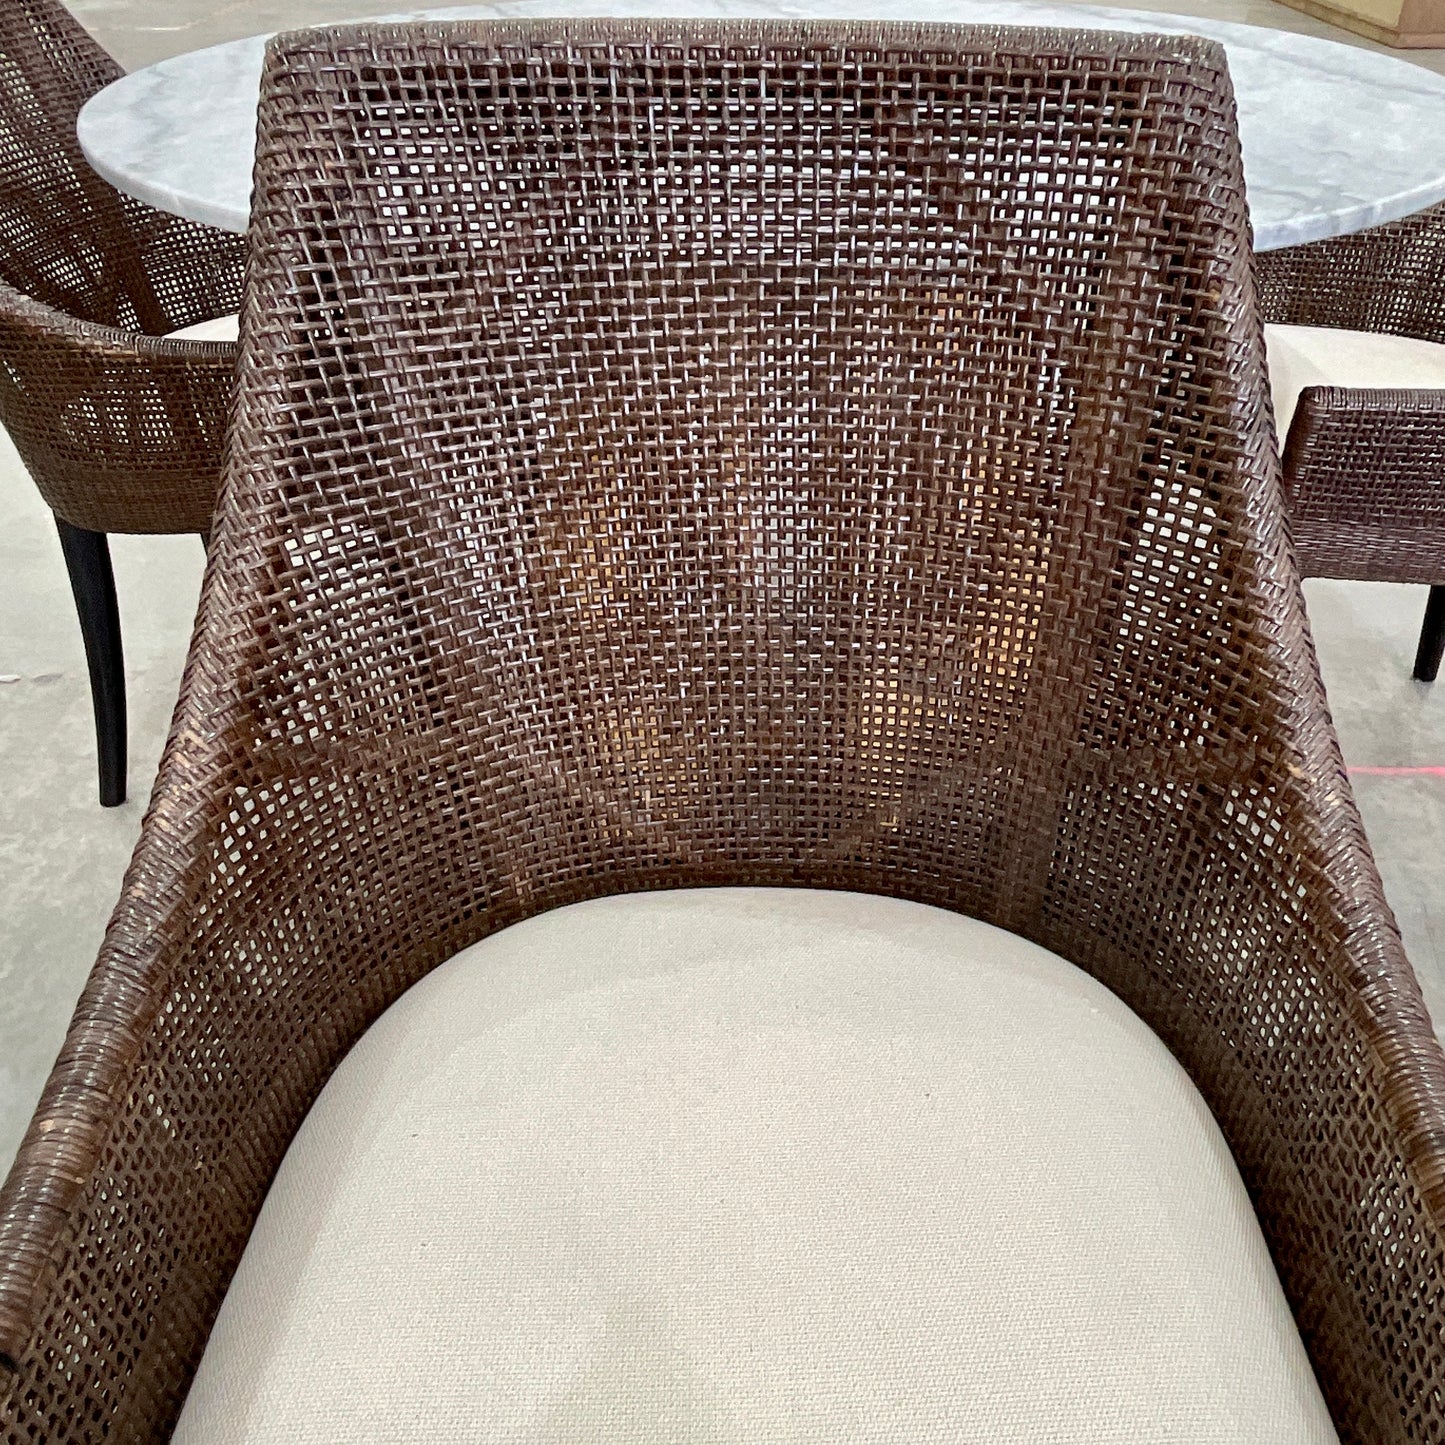 Set of SIX Miami Dining Chairs in Chocolate by Coco Republic